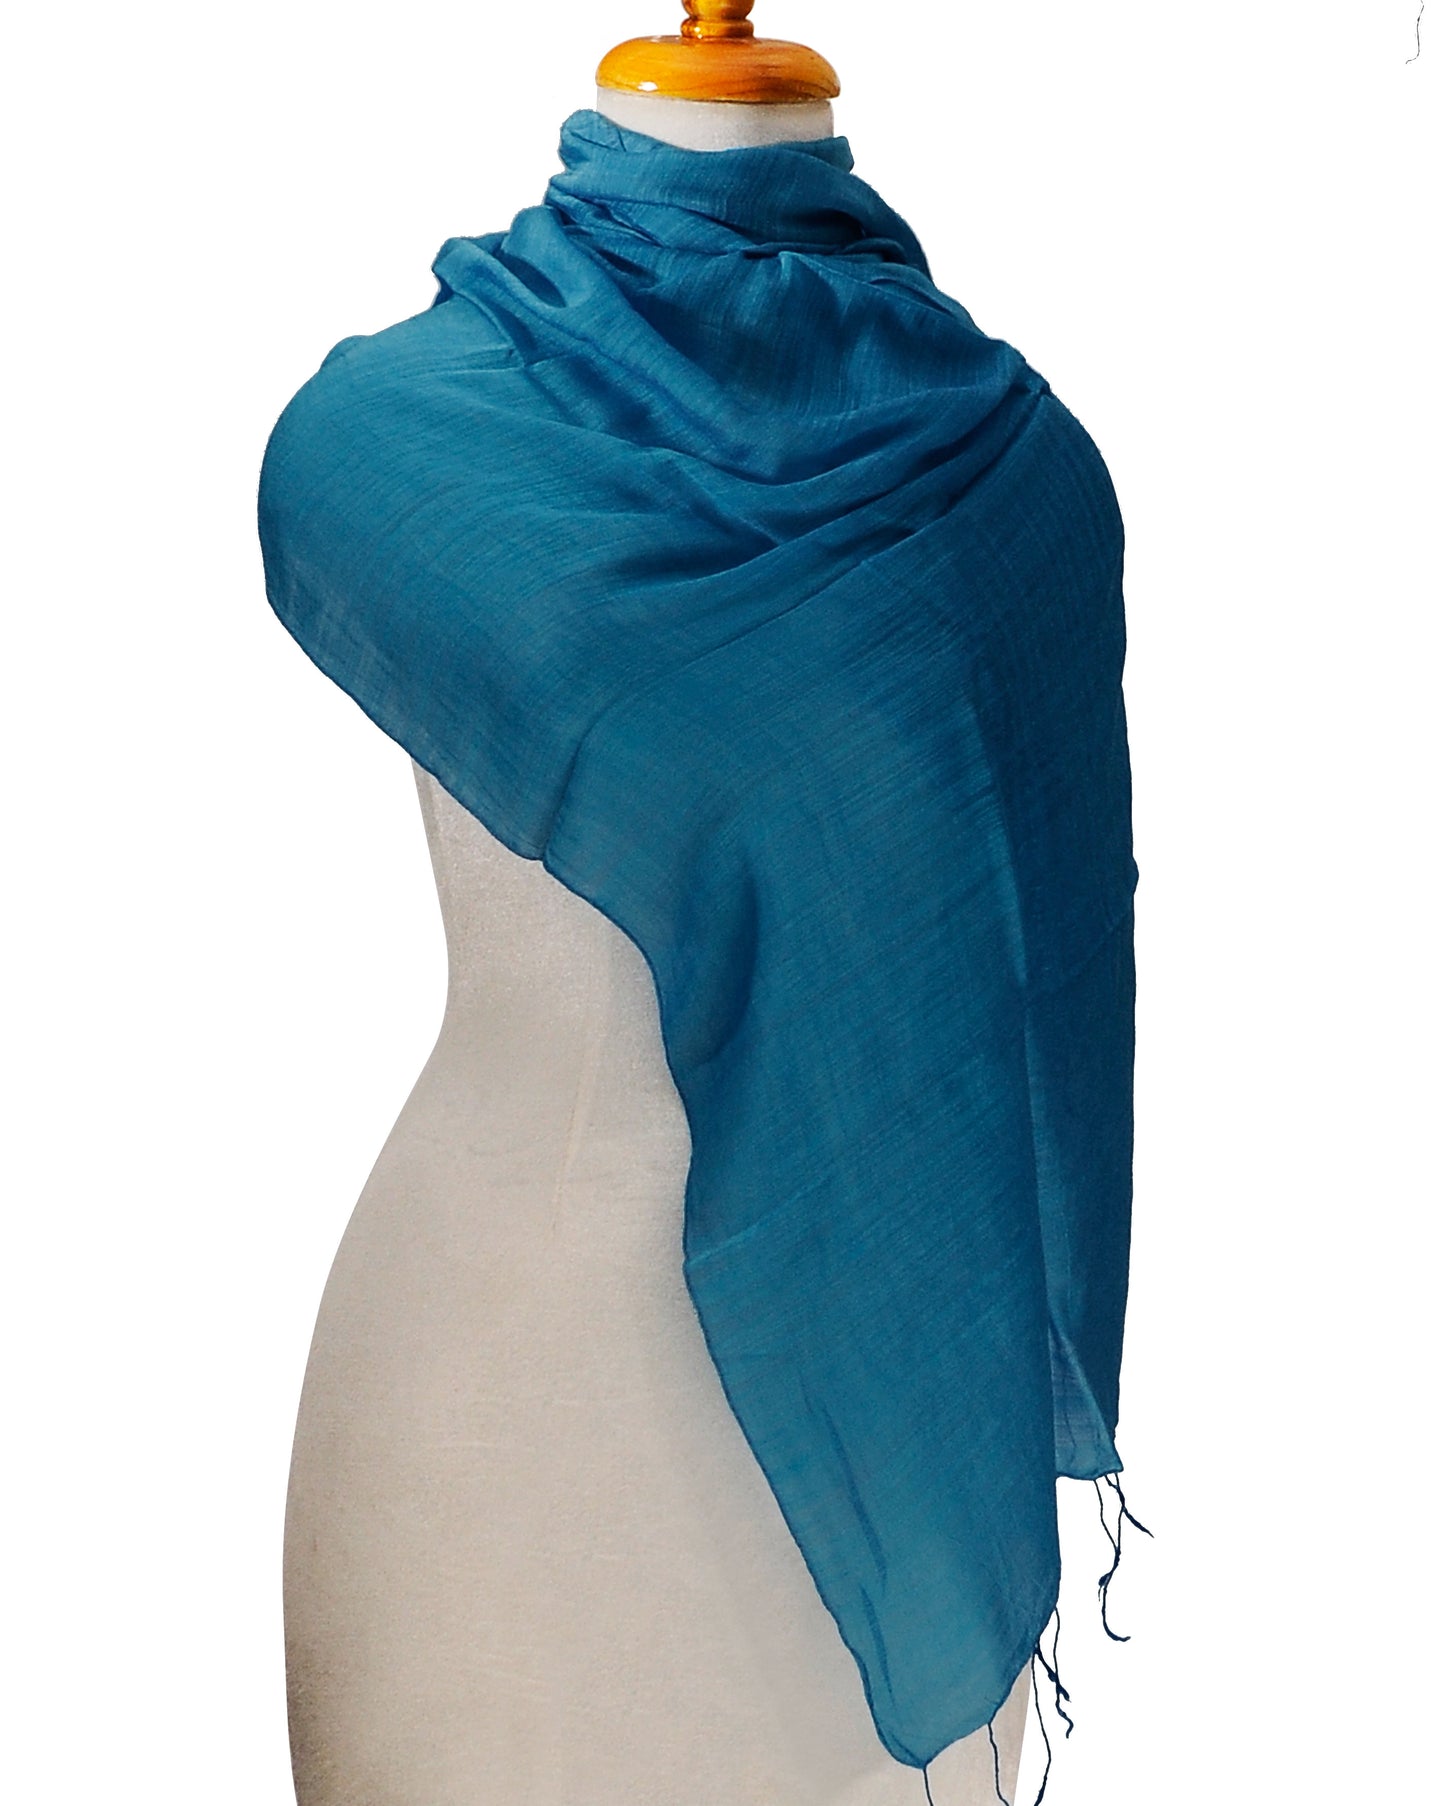 Large Vietnamese Silk Soft Wrap Scarf Shawl Pashmina 70x30 inches New from Vietnam